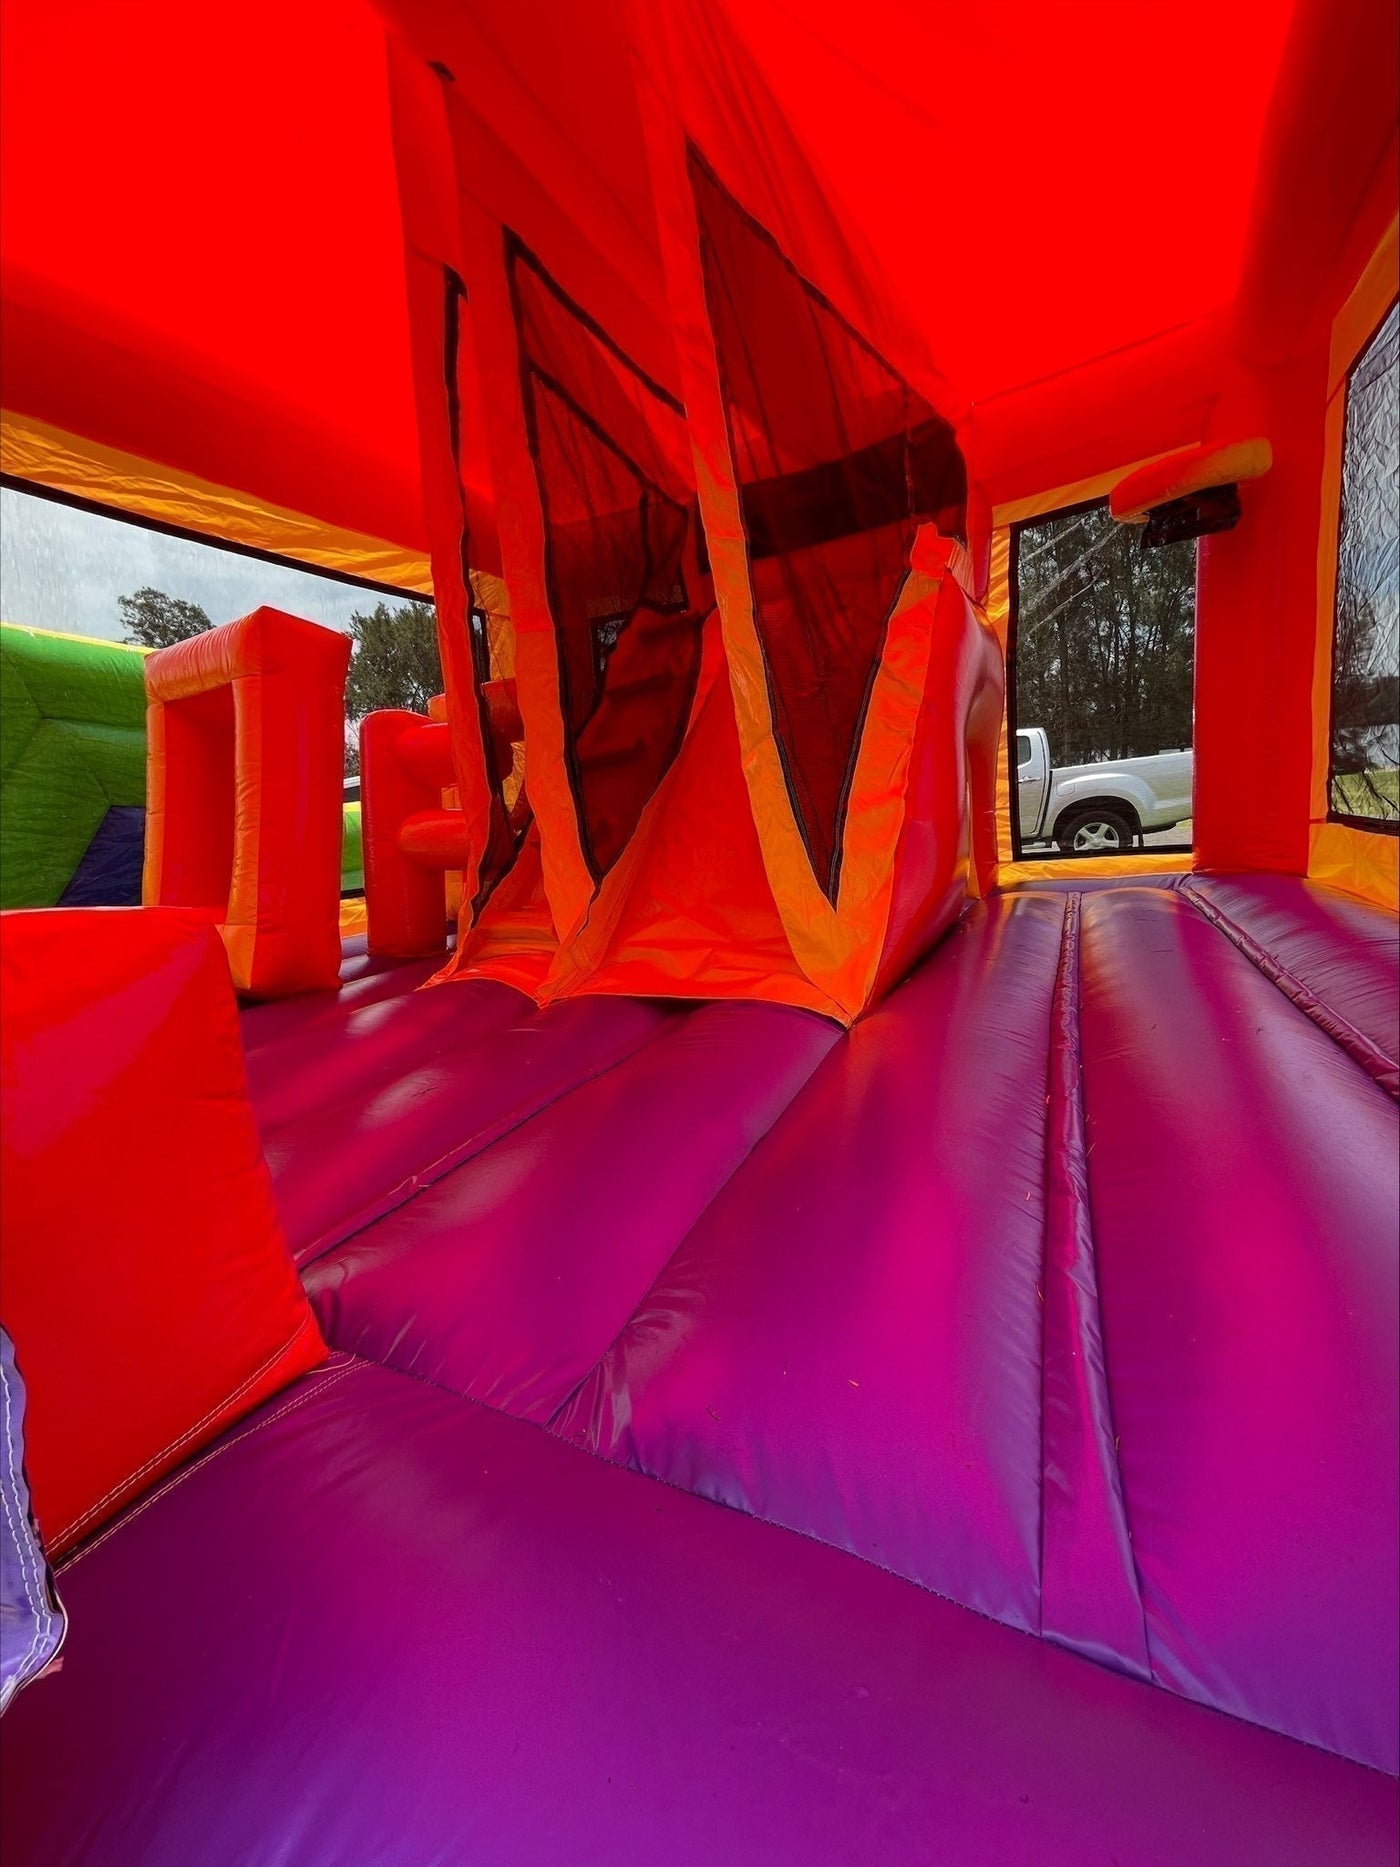 Christmas #8 Extra Large Obstacle Combo Jumping Castle